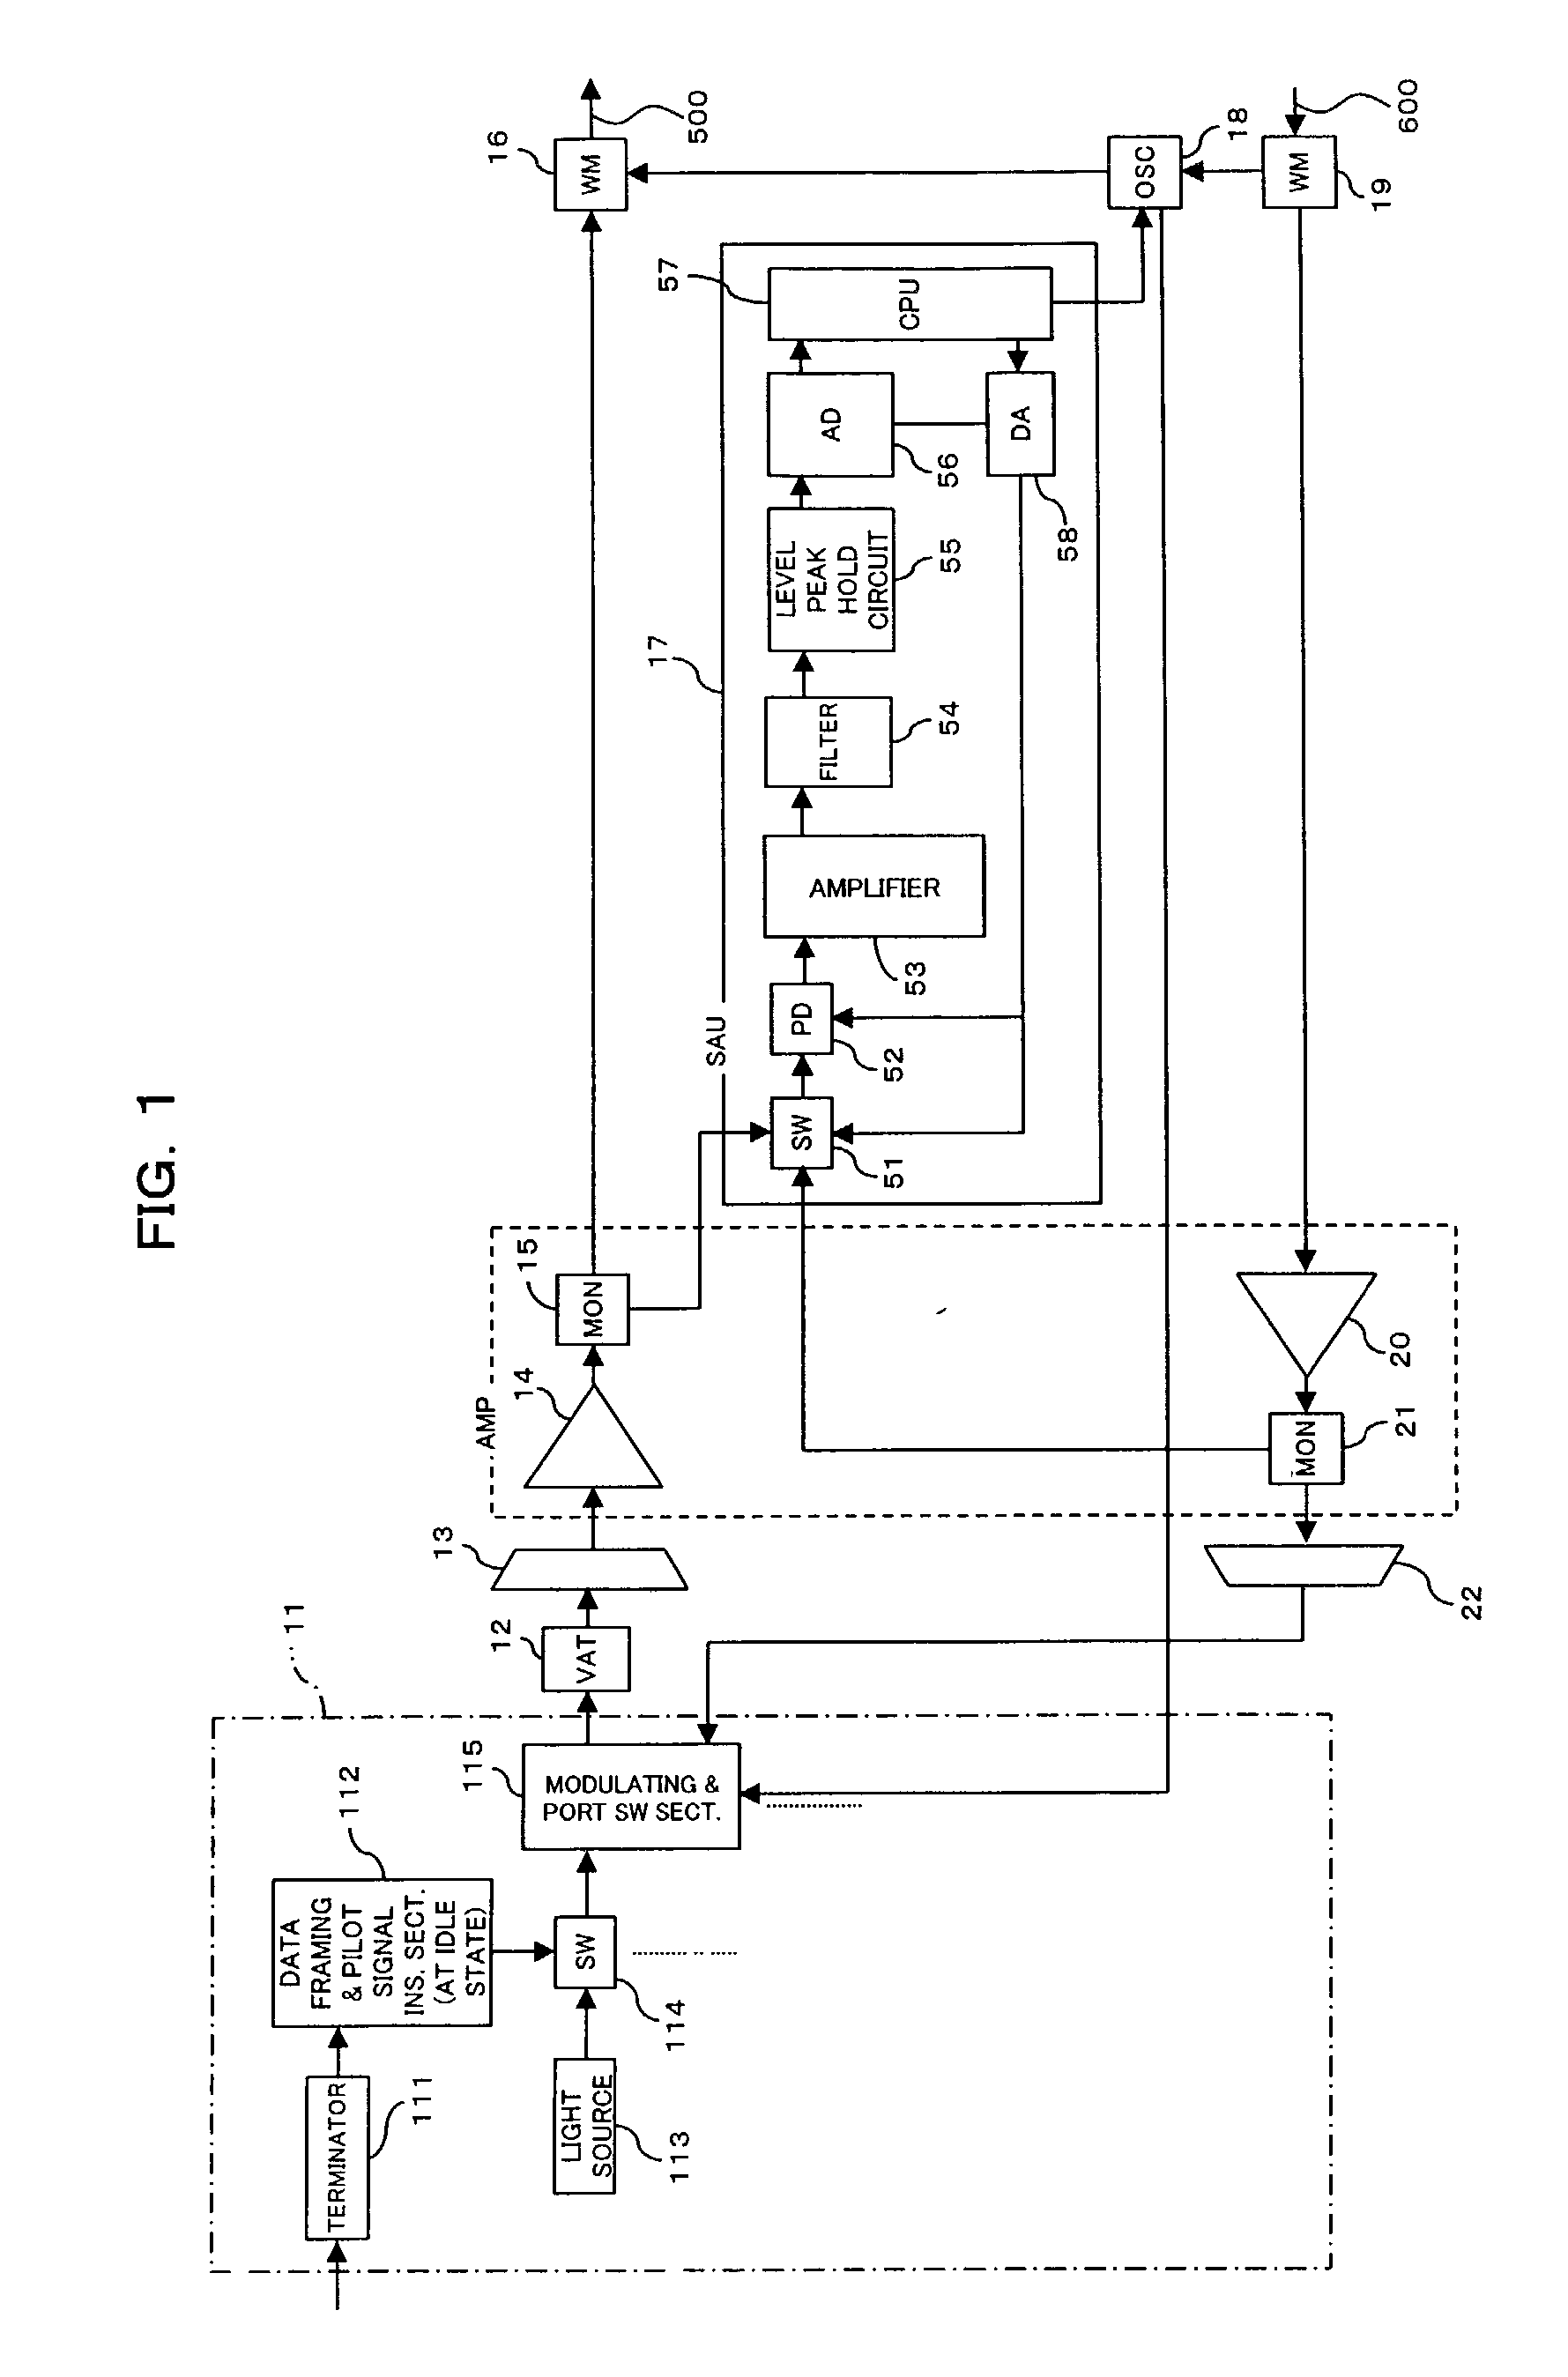 Wavelength-division multiplex communication system and apparatus